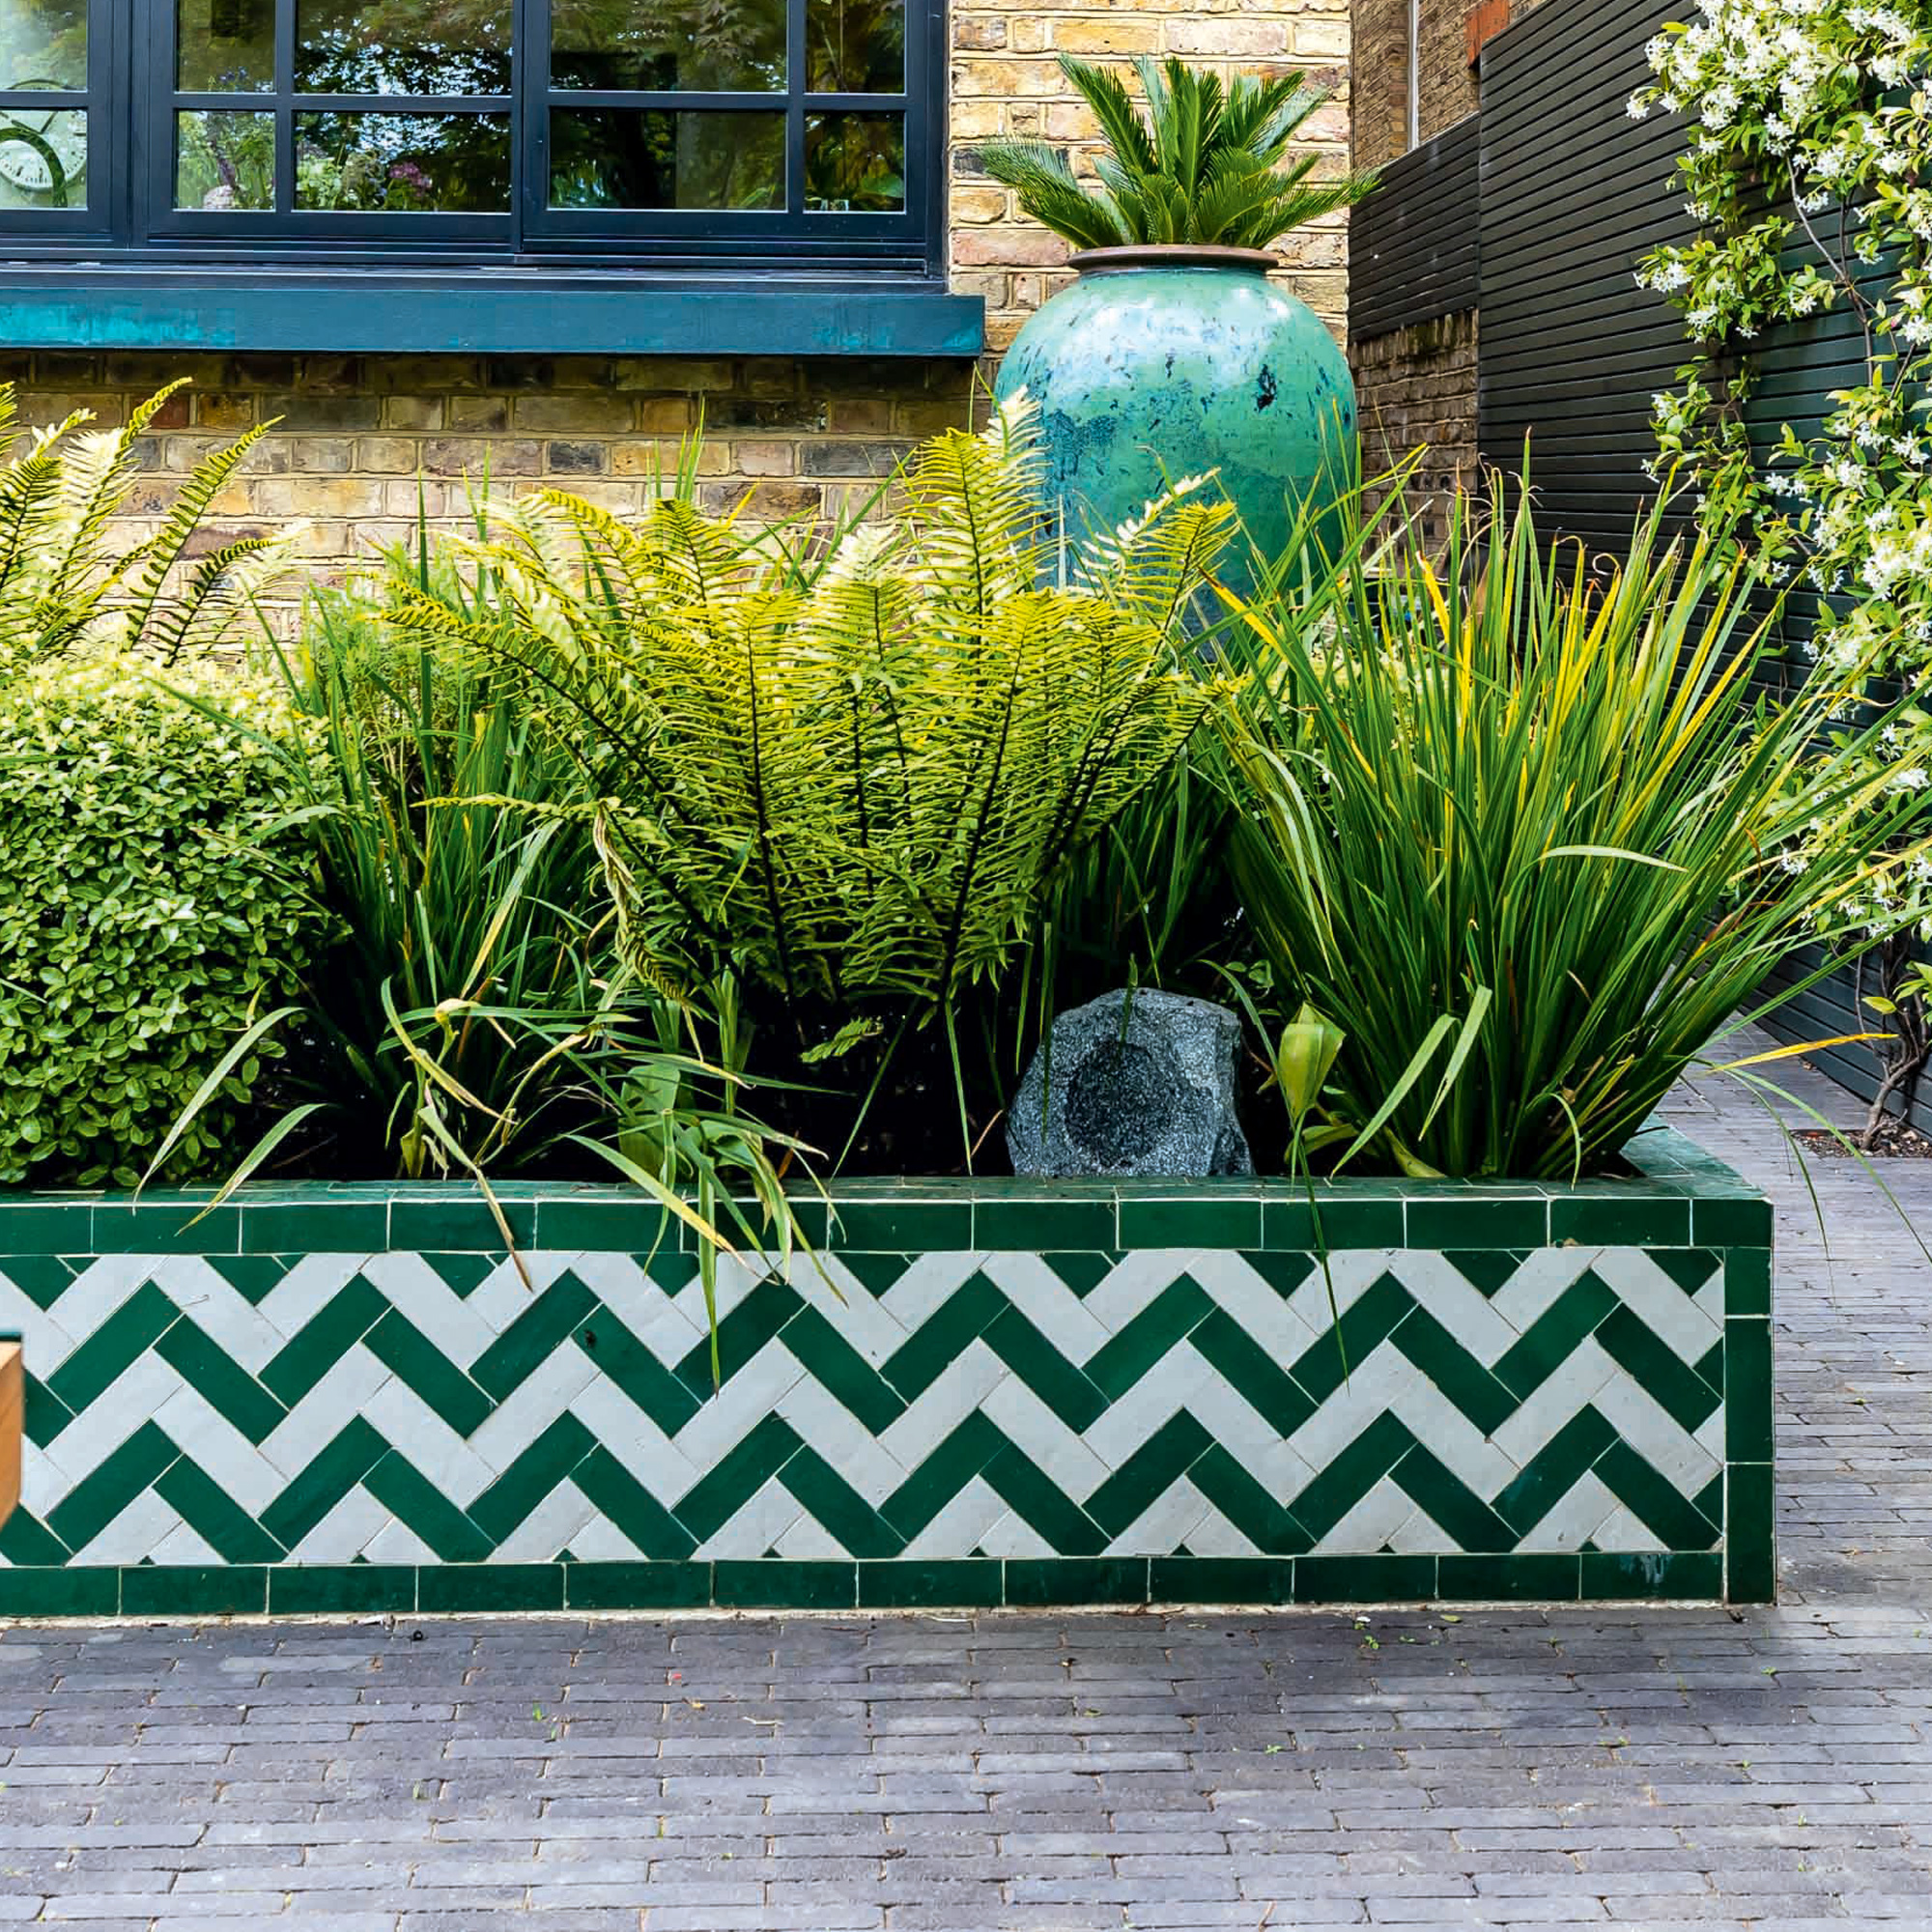 A raised bed planter covered in green and white chevron tiling packed with ferns and lush greenery